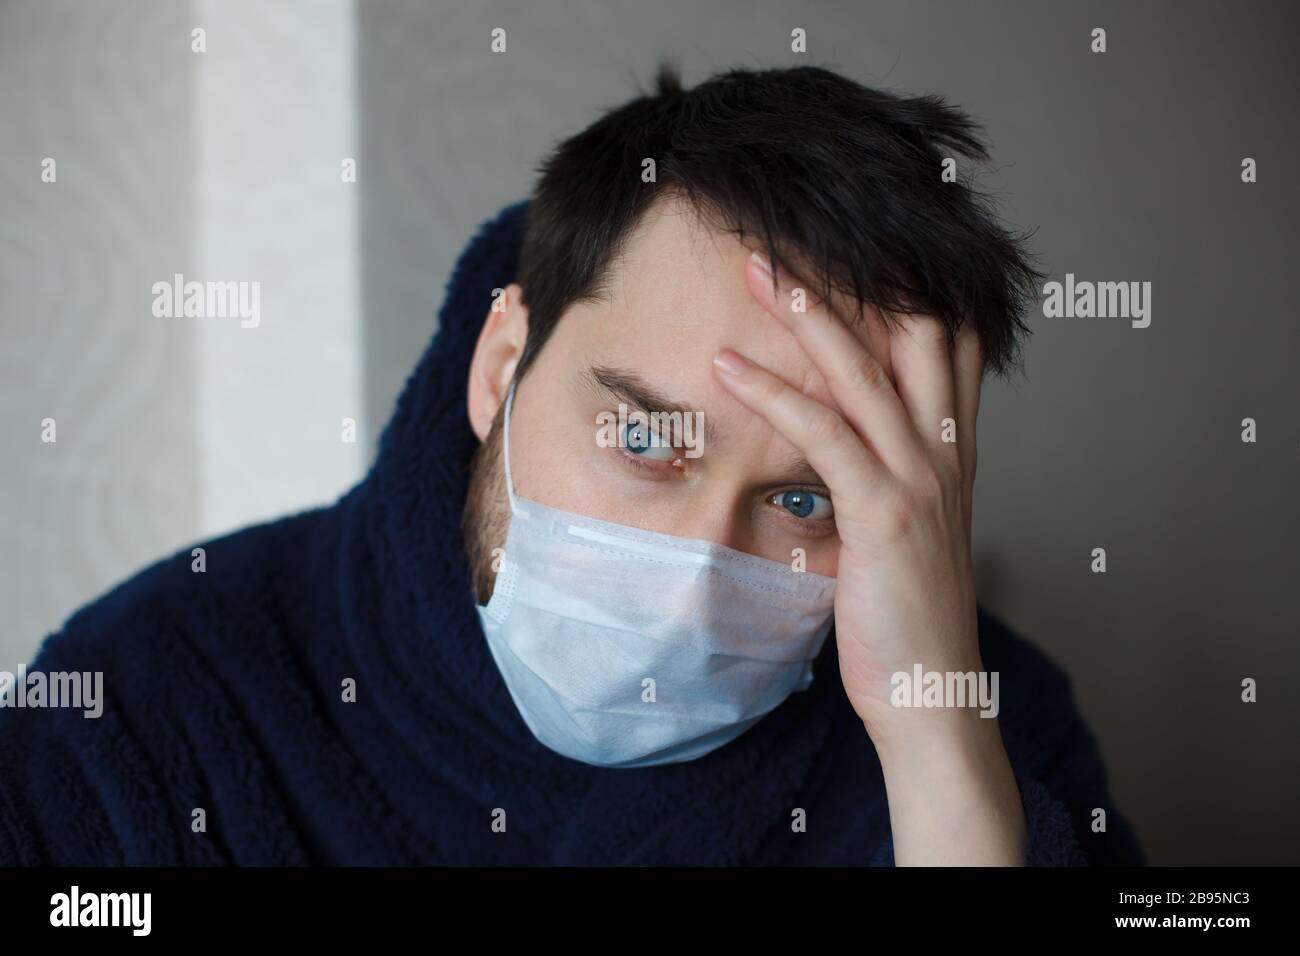 Overhelmed man in medicine mask with his hand on a forhead. How to stay calm during coronavirus pandemic Stock Photo